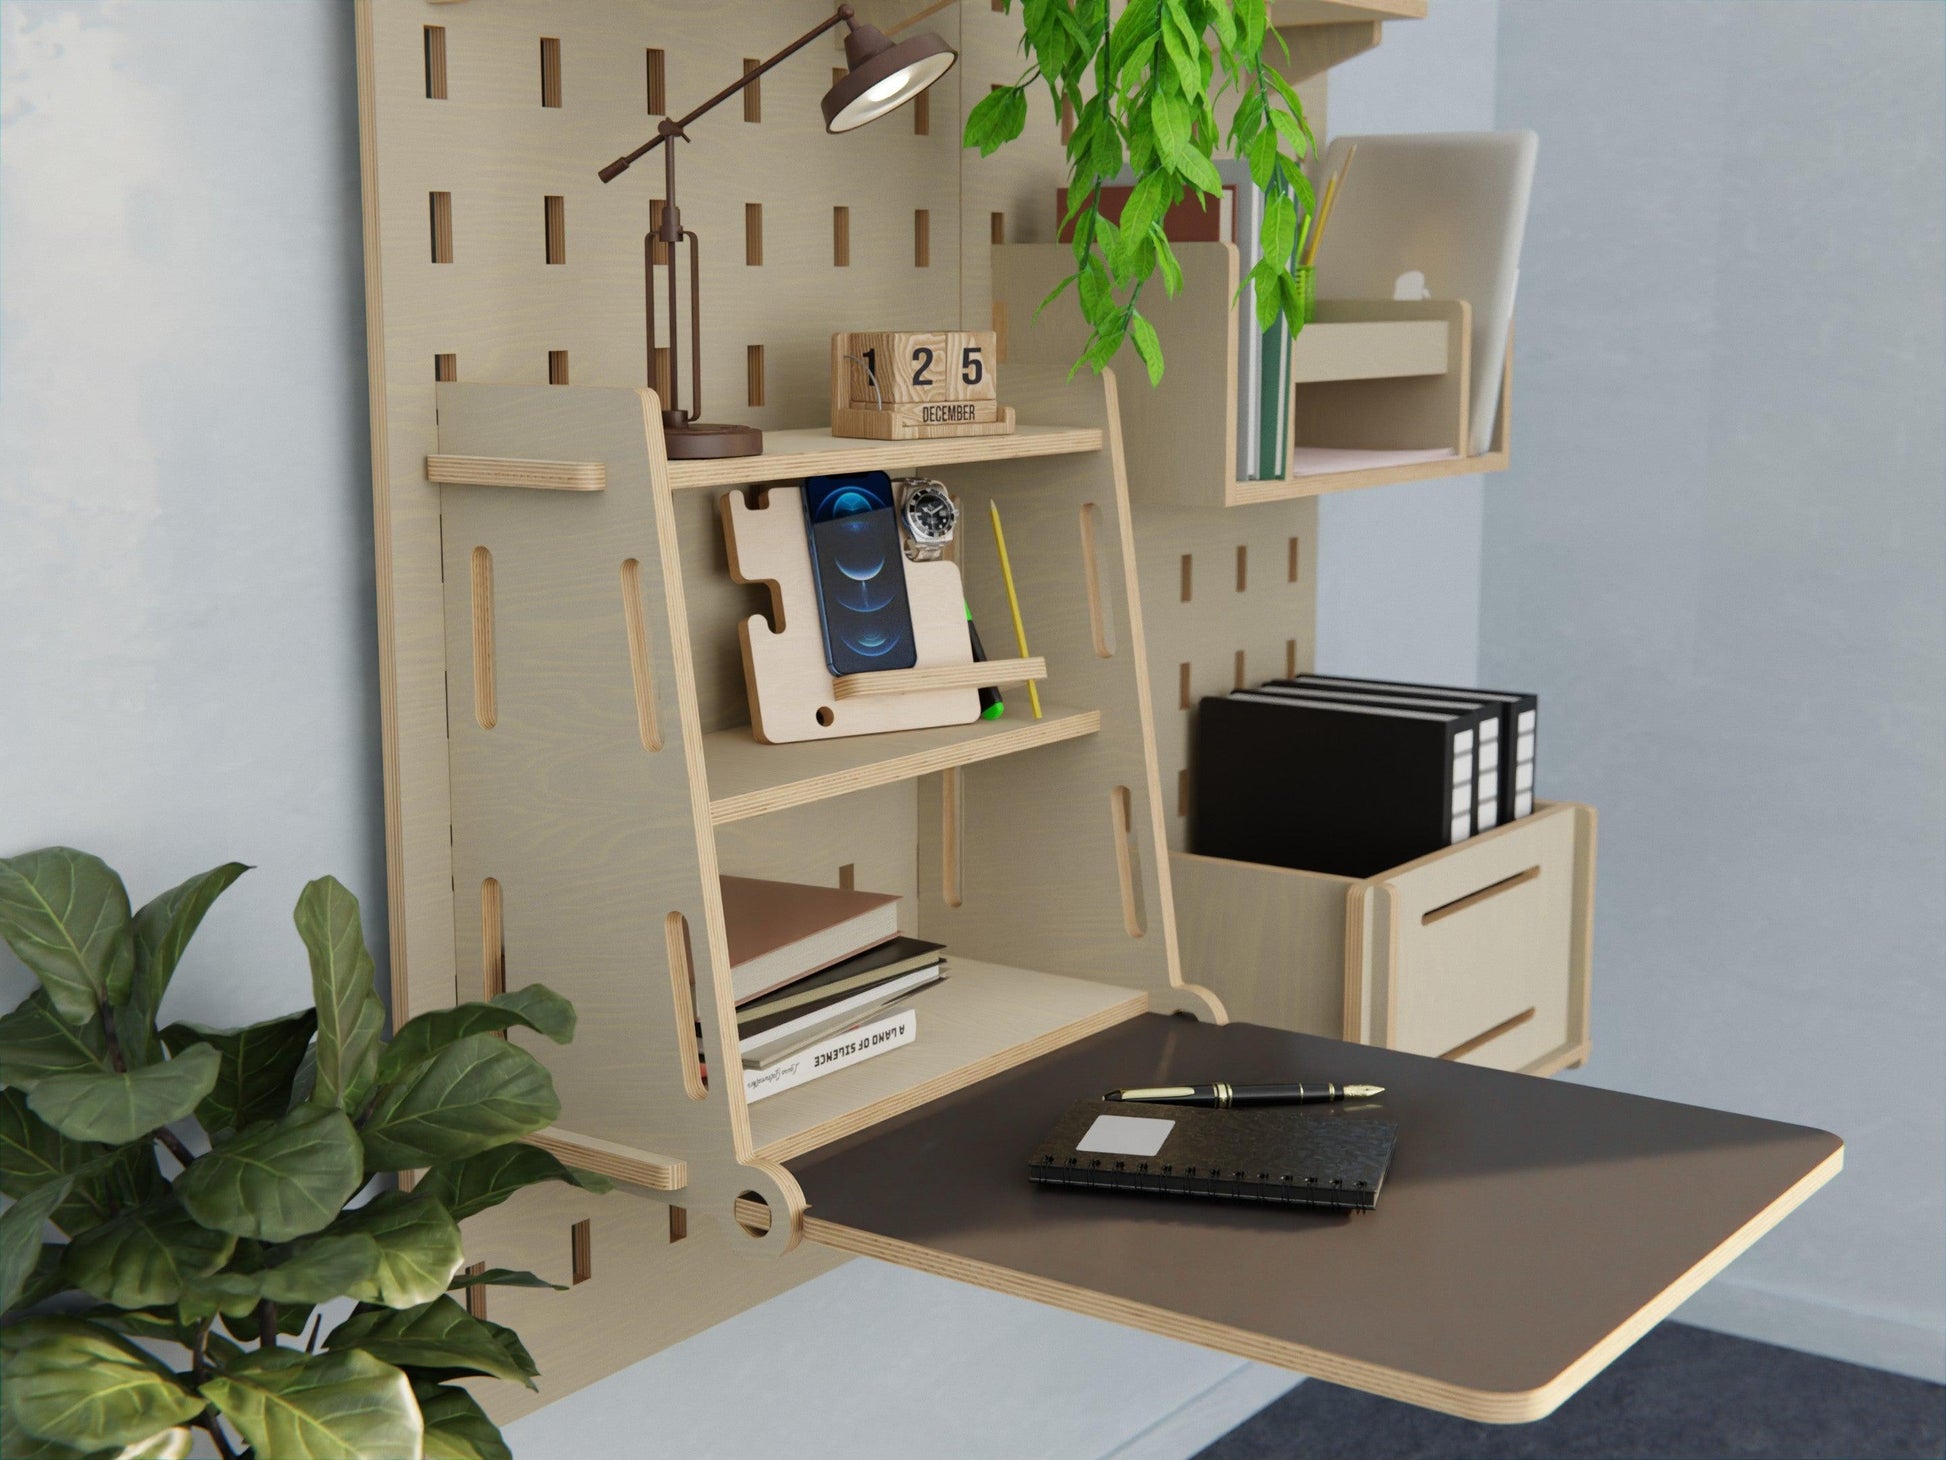 Unlock the potential of your space with our functional plywood pegboard, featuring a foldable desk and plenty of shelf storage!